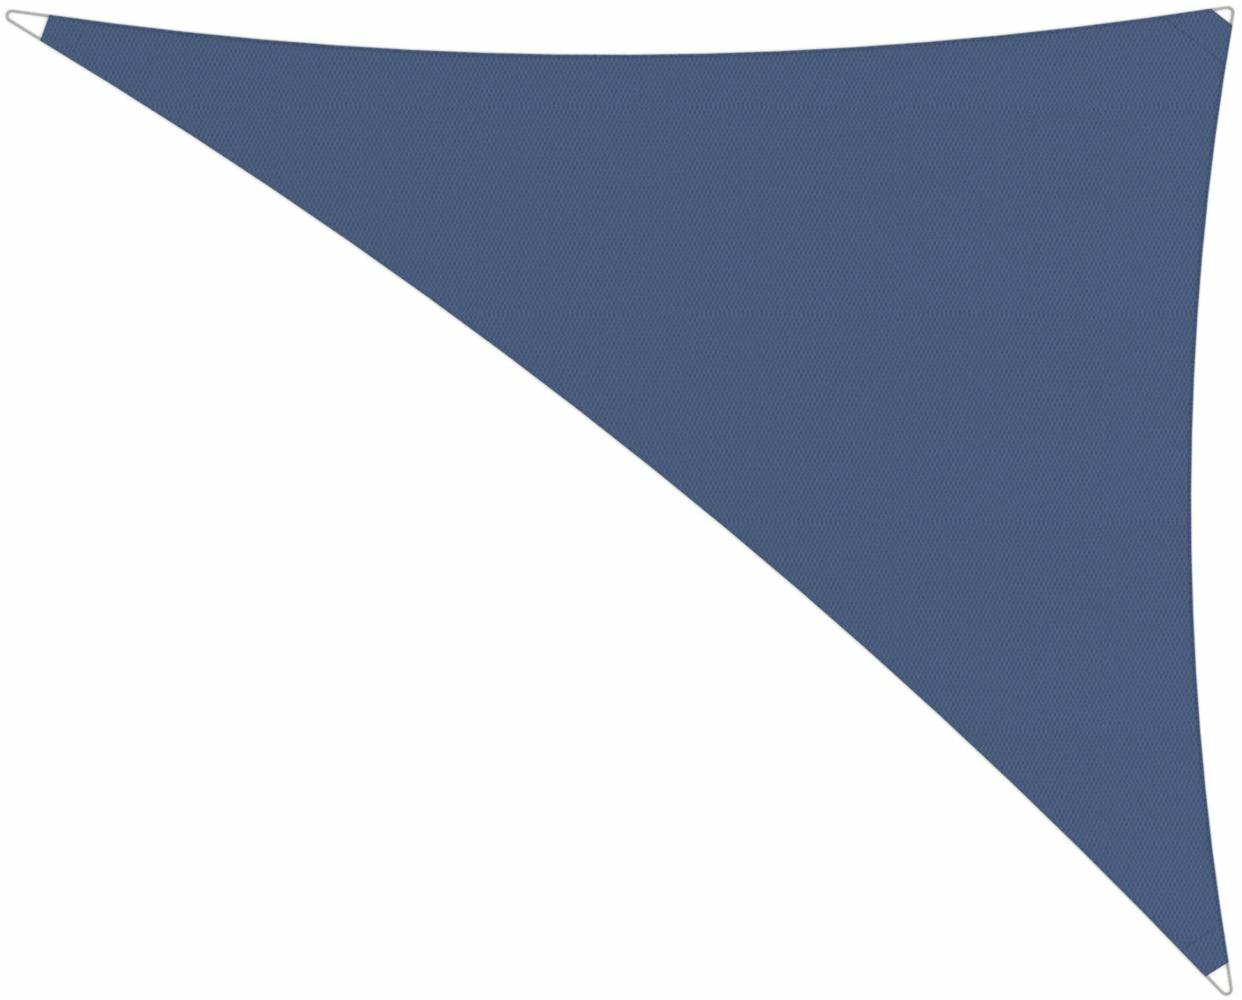 Ingenua shade sail Triangle 4 x 5 x 6,4 m, for outdoor use. Colour of the fabric shade sail Blue Storm.